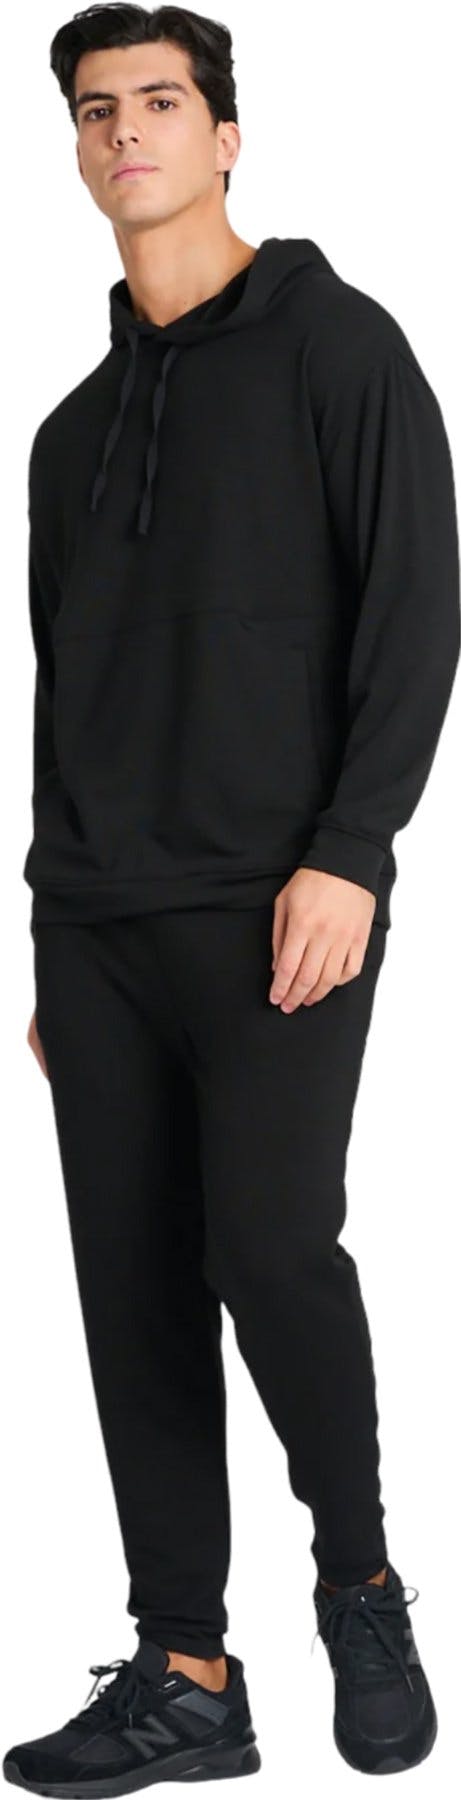 Product image for Warm Hoodie - Men's